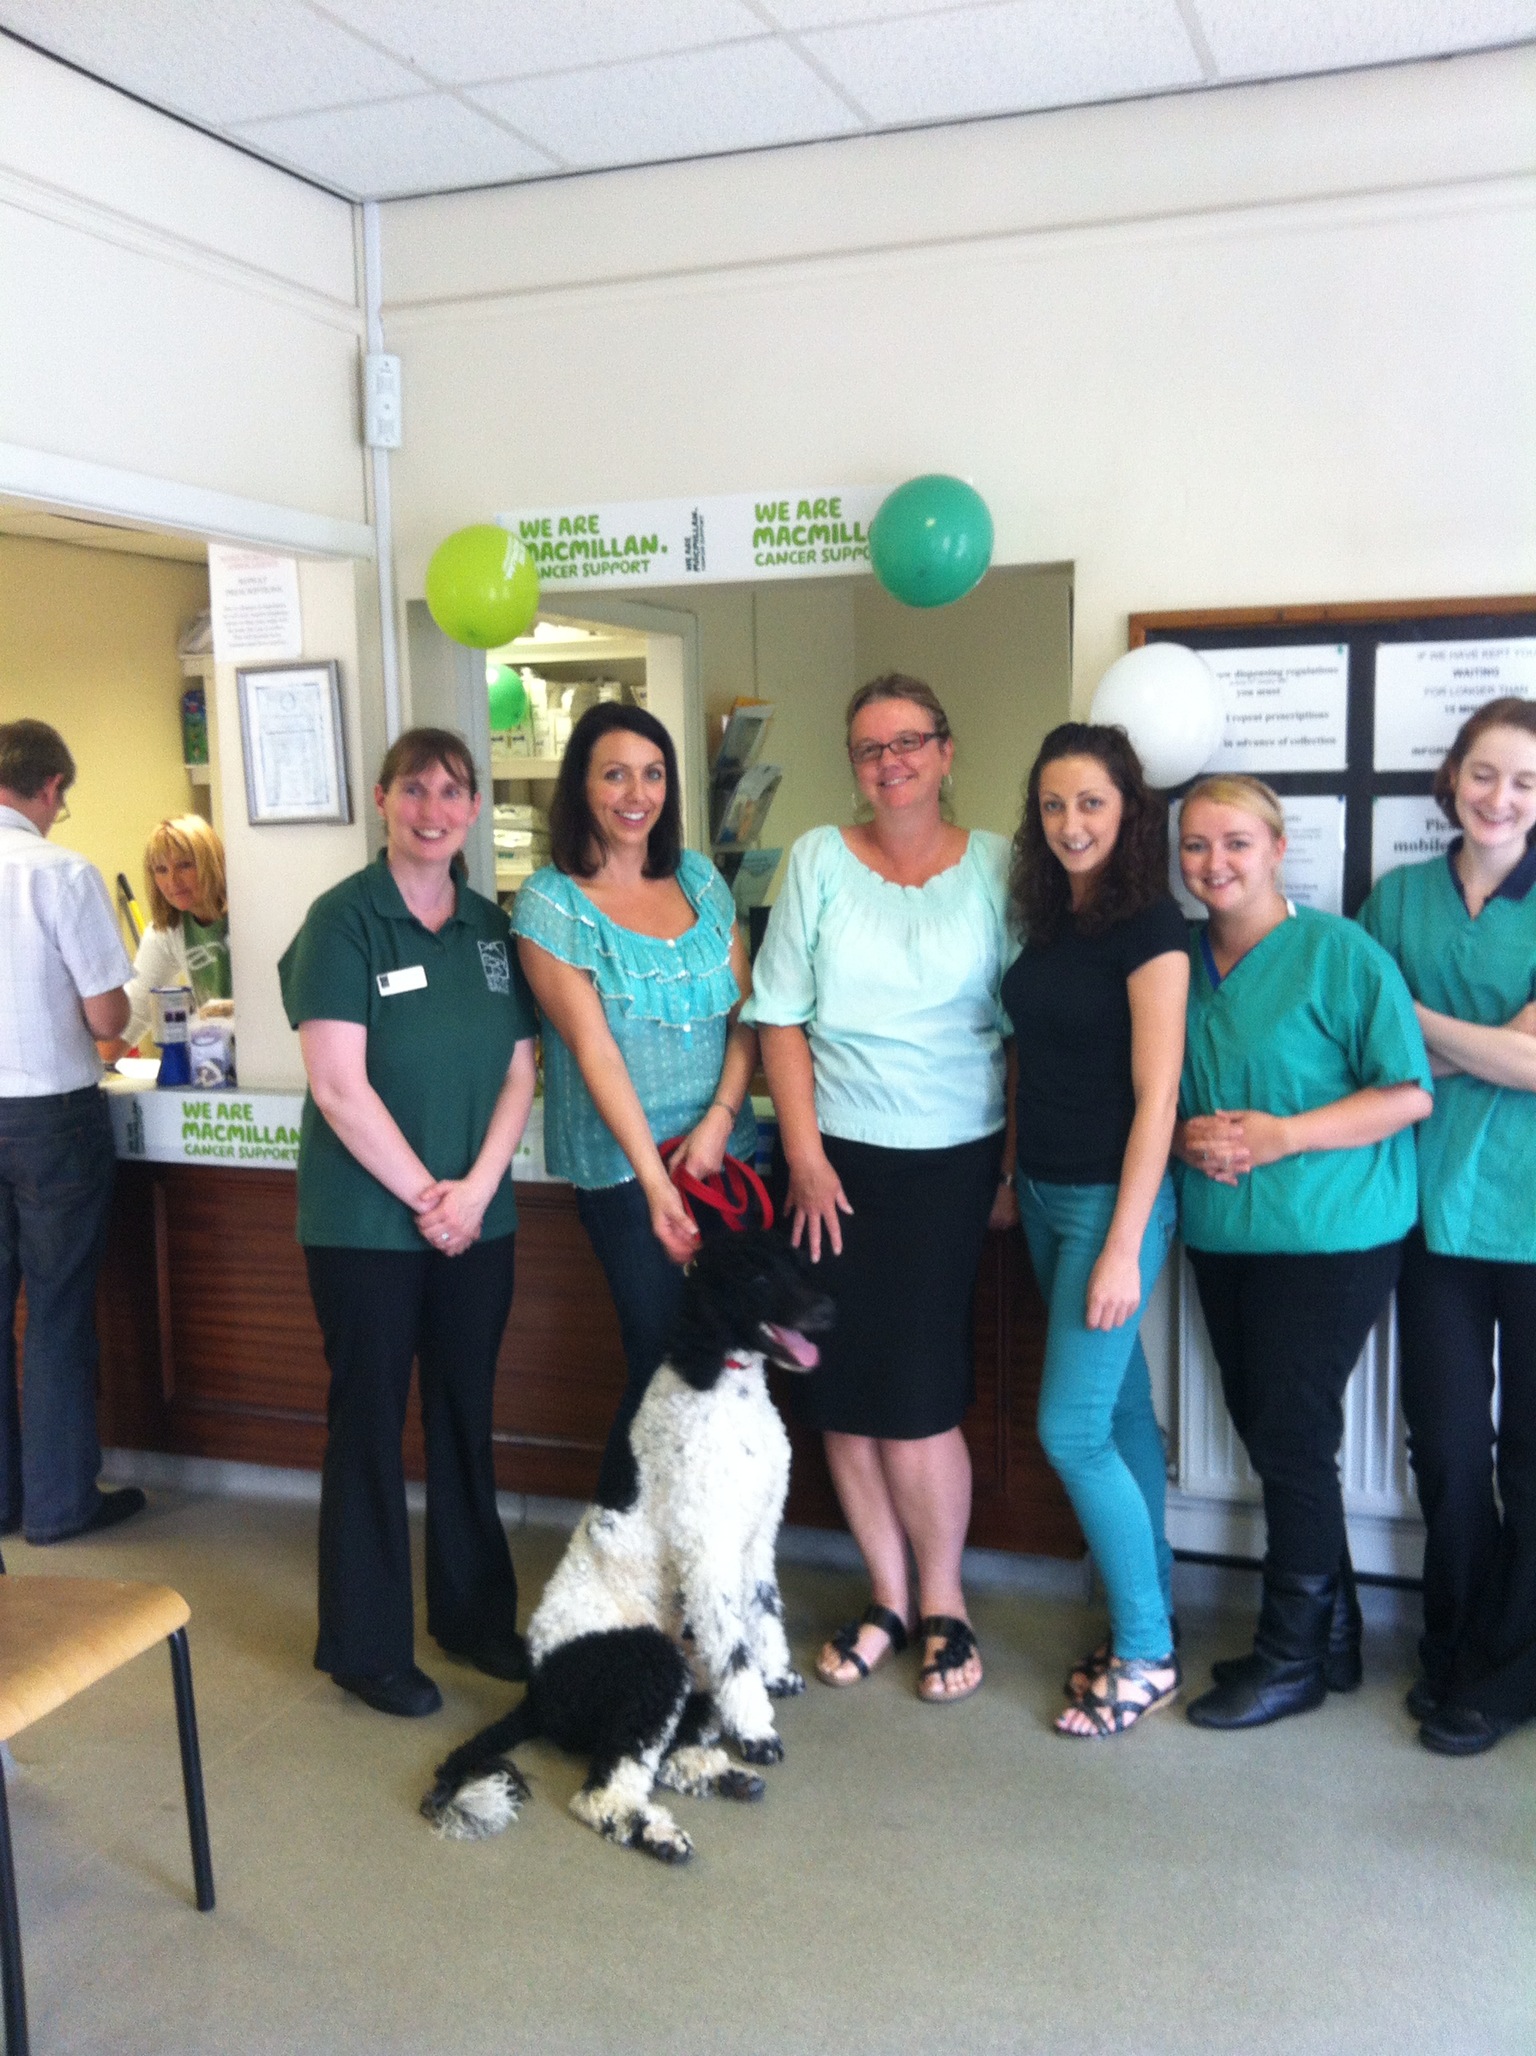 Images Stanley House Veterinary Group - Colne